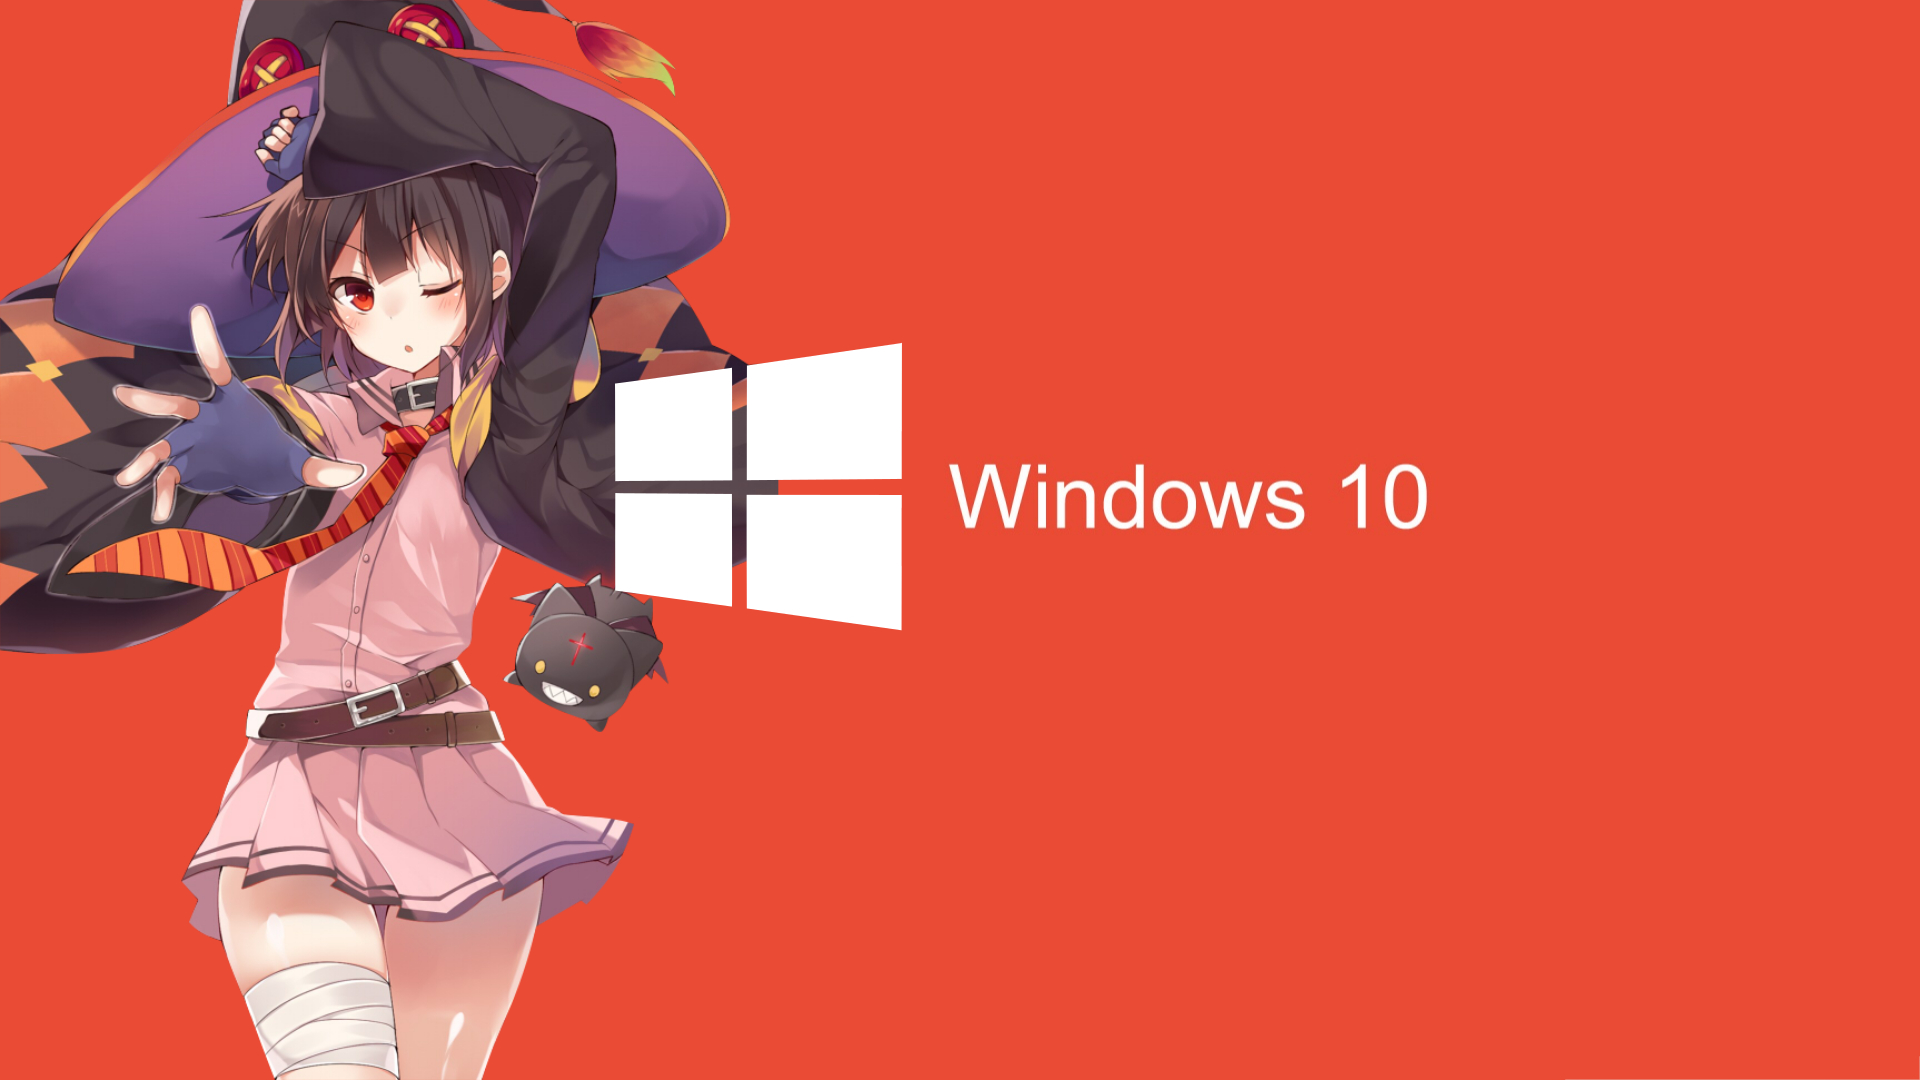 1920x1080 Windows 10 Wallpaper Anime | mywallpapers site | Anime, Windows 10, Wallpaper windows 10